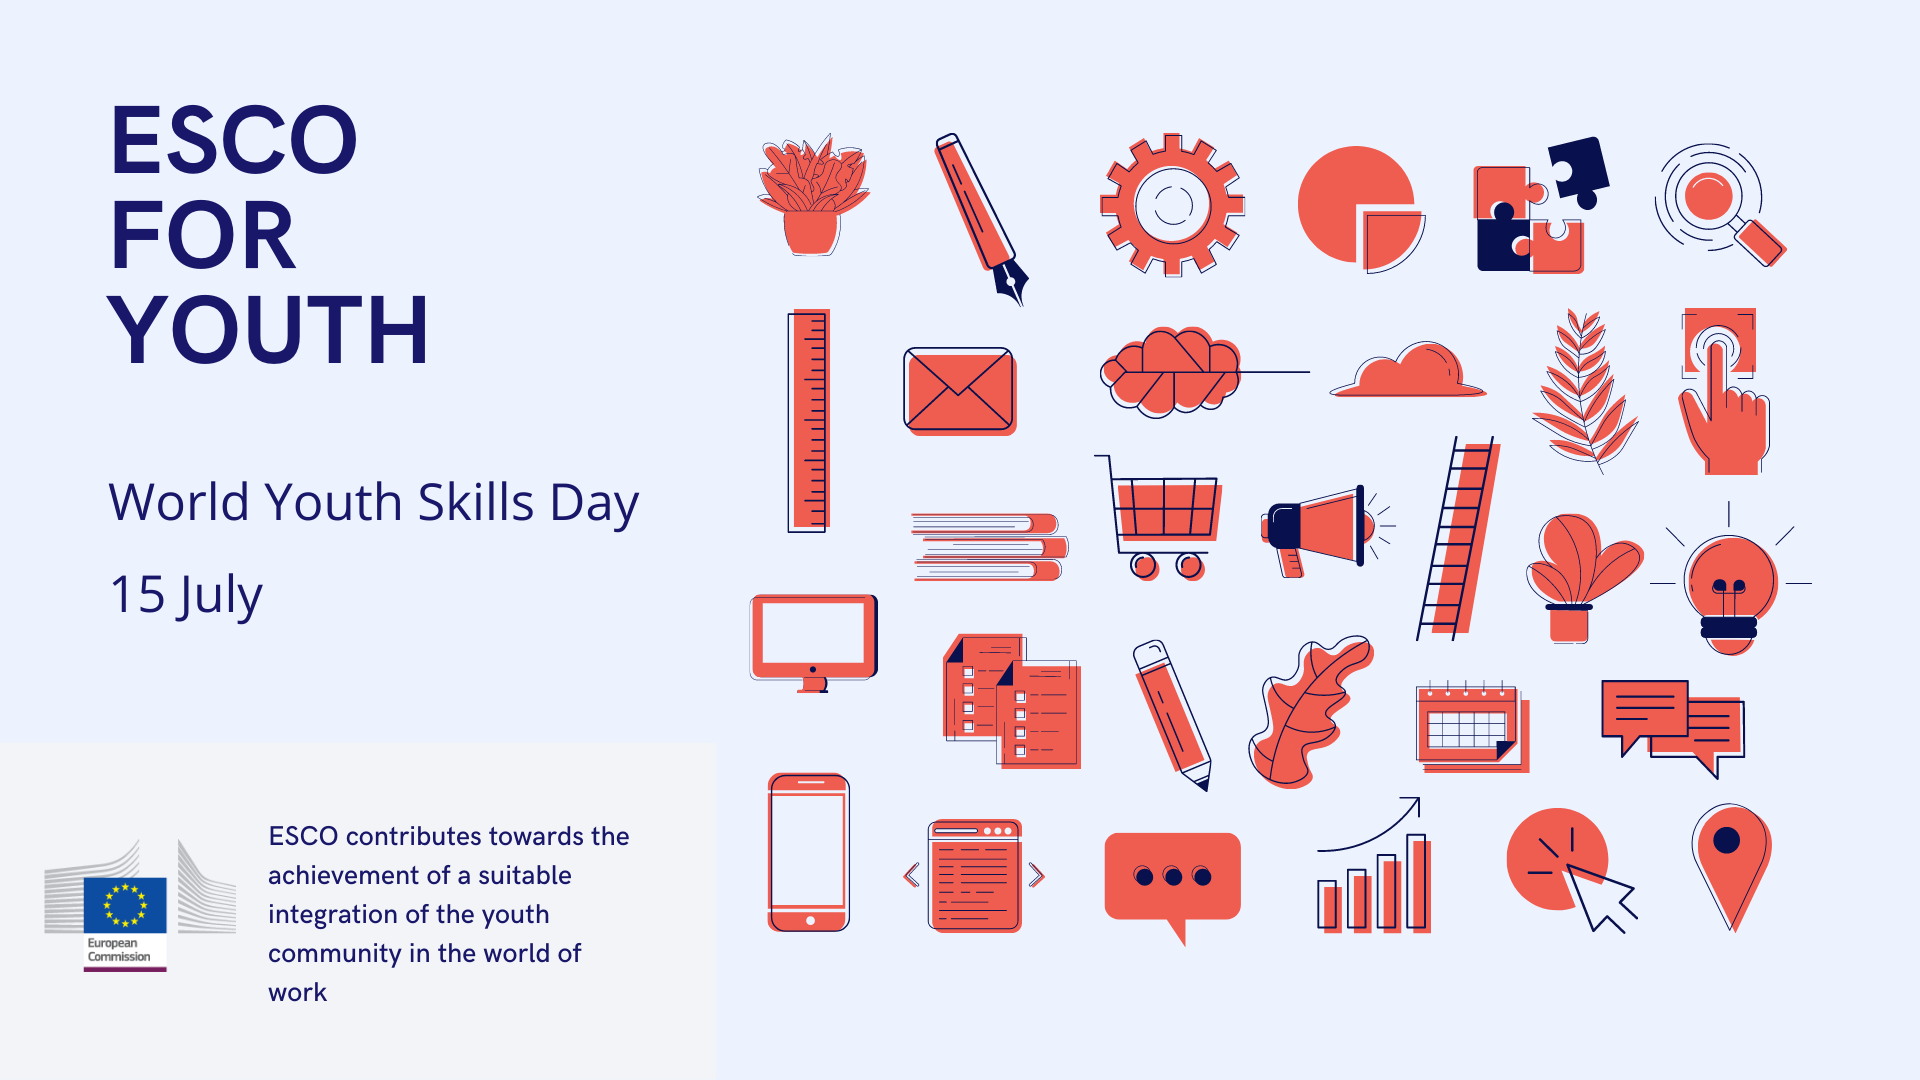 image stating: ESCO for Youth: world youth skills day 15 July